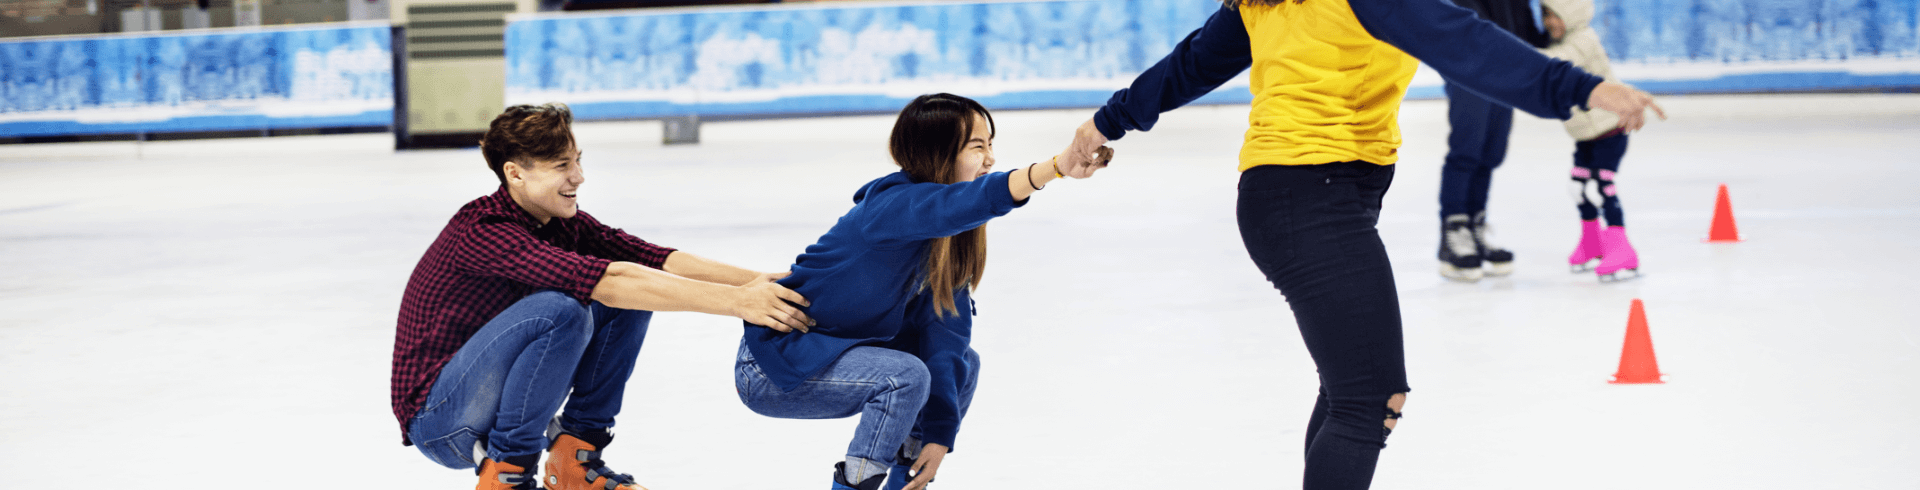 Leisure Business | Synthetic Ice Rinks an excellent opportunity